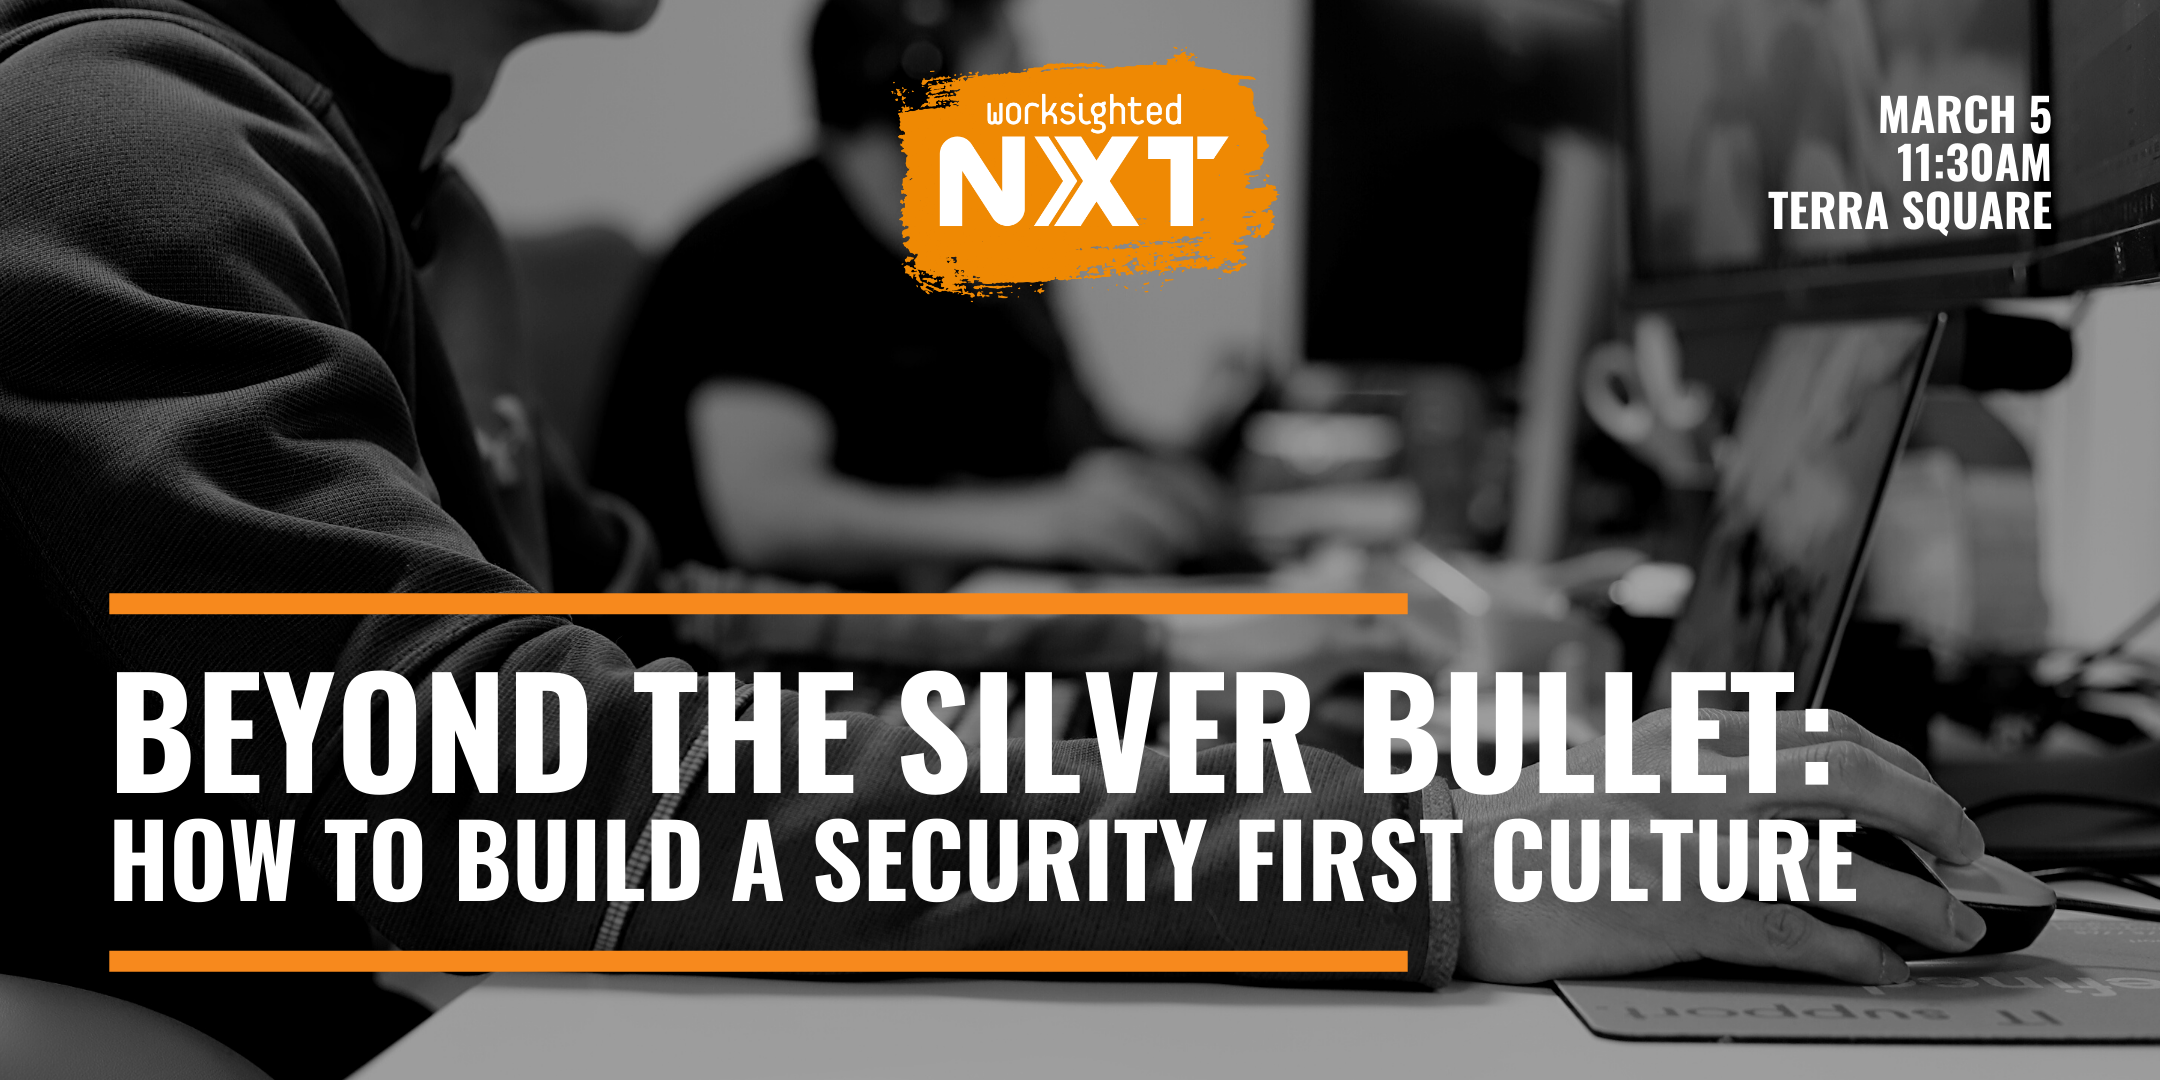 Worksighted NXT Presents – Beyond the Silver Bullet: How to Build a Security First Culture